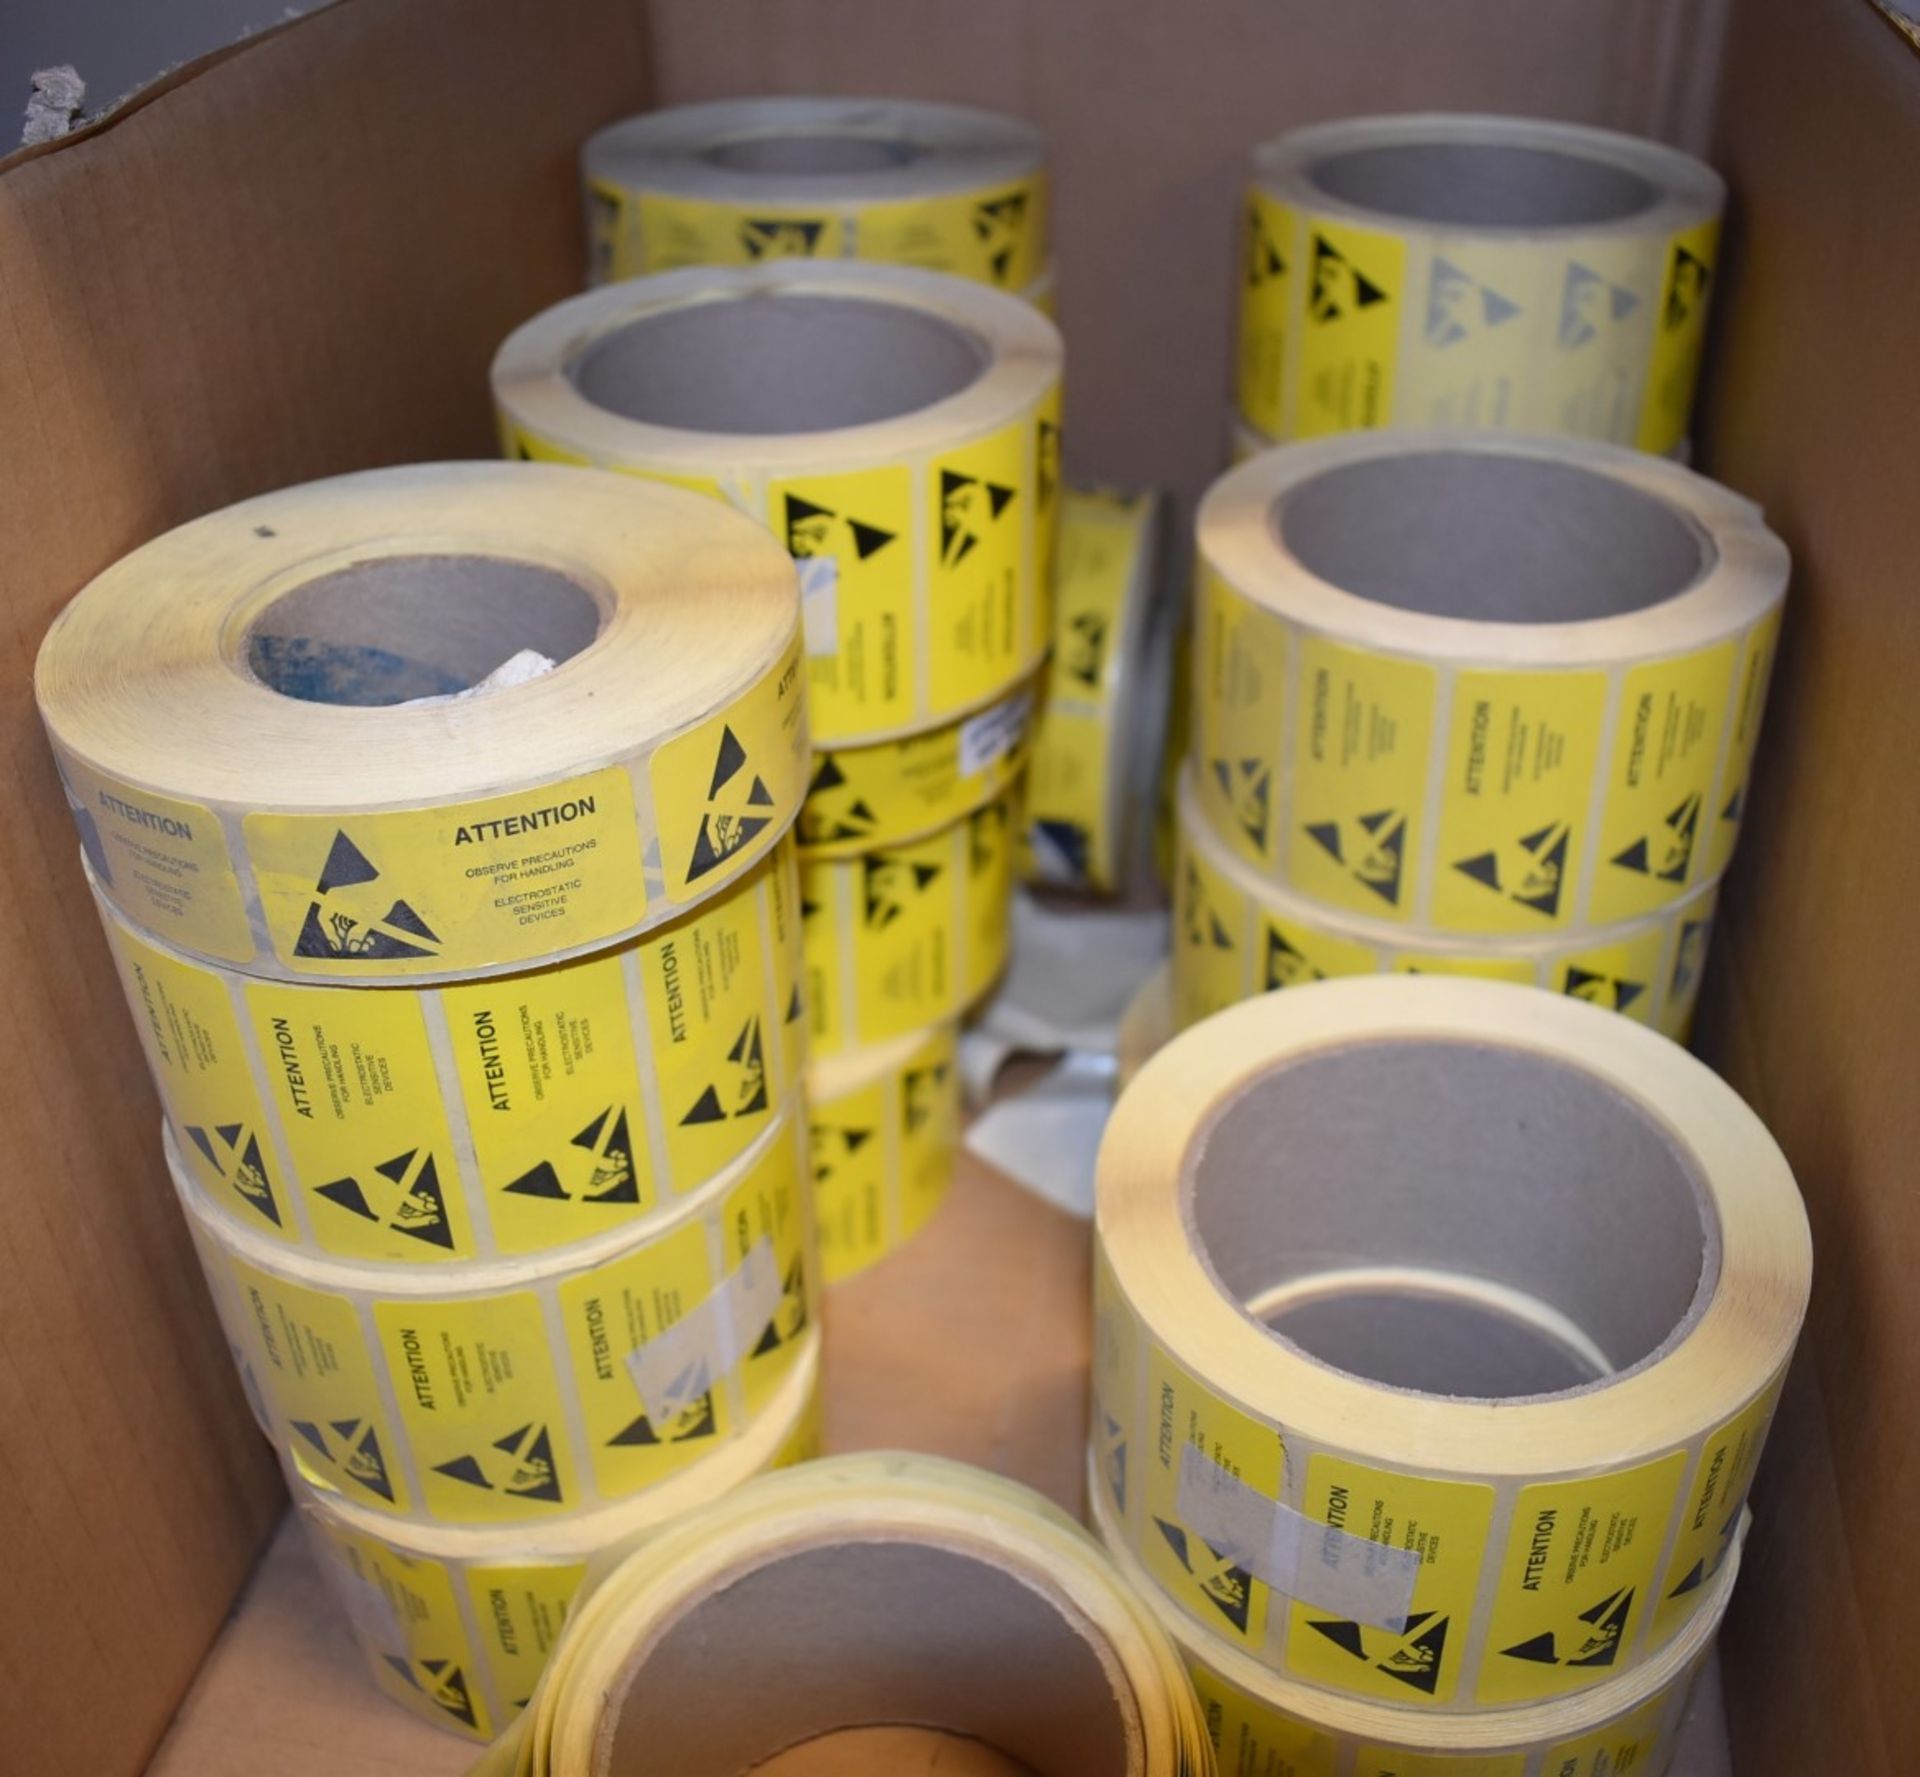 21 x Rolls of 'Attention Observe Precautions for Handling Electrostatic Sensitive Devices